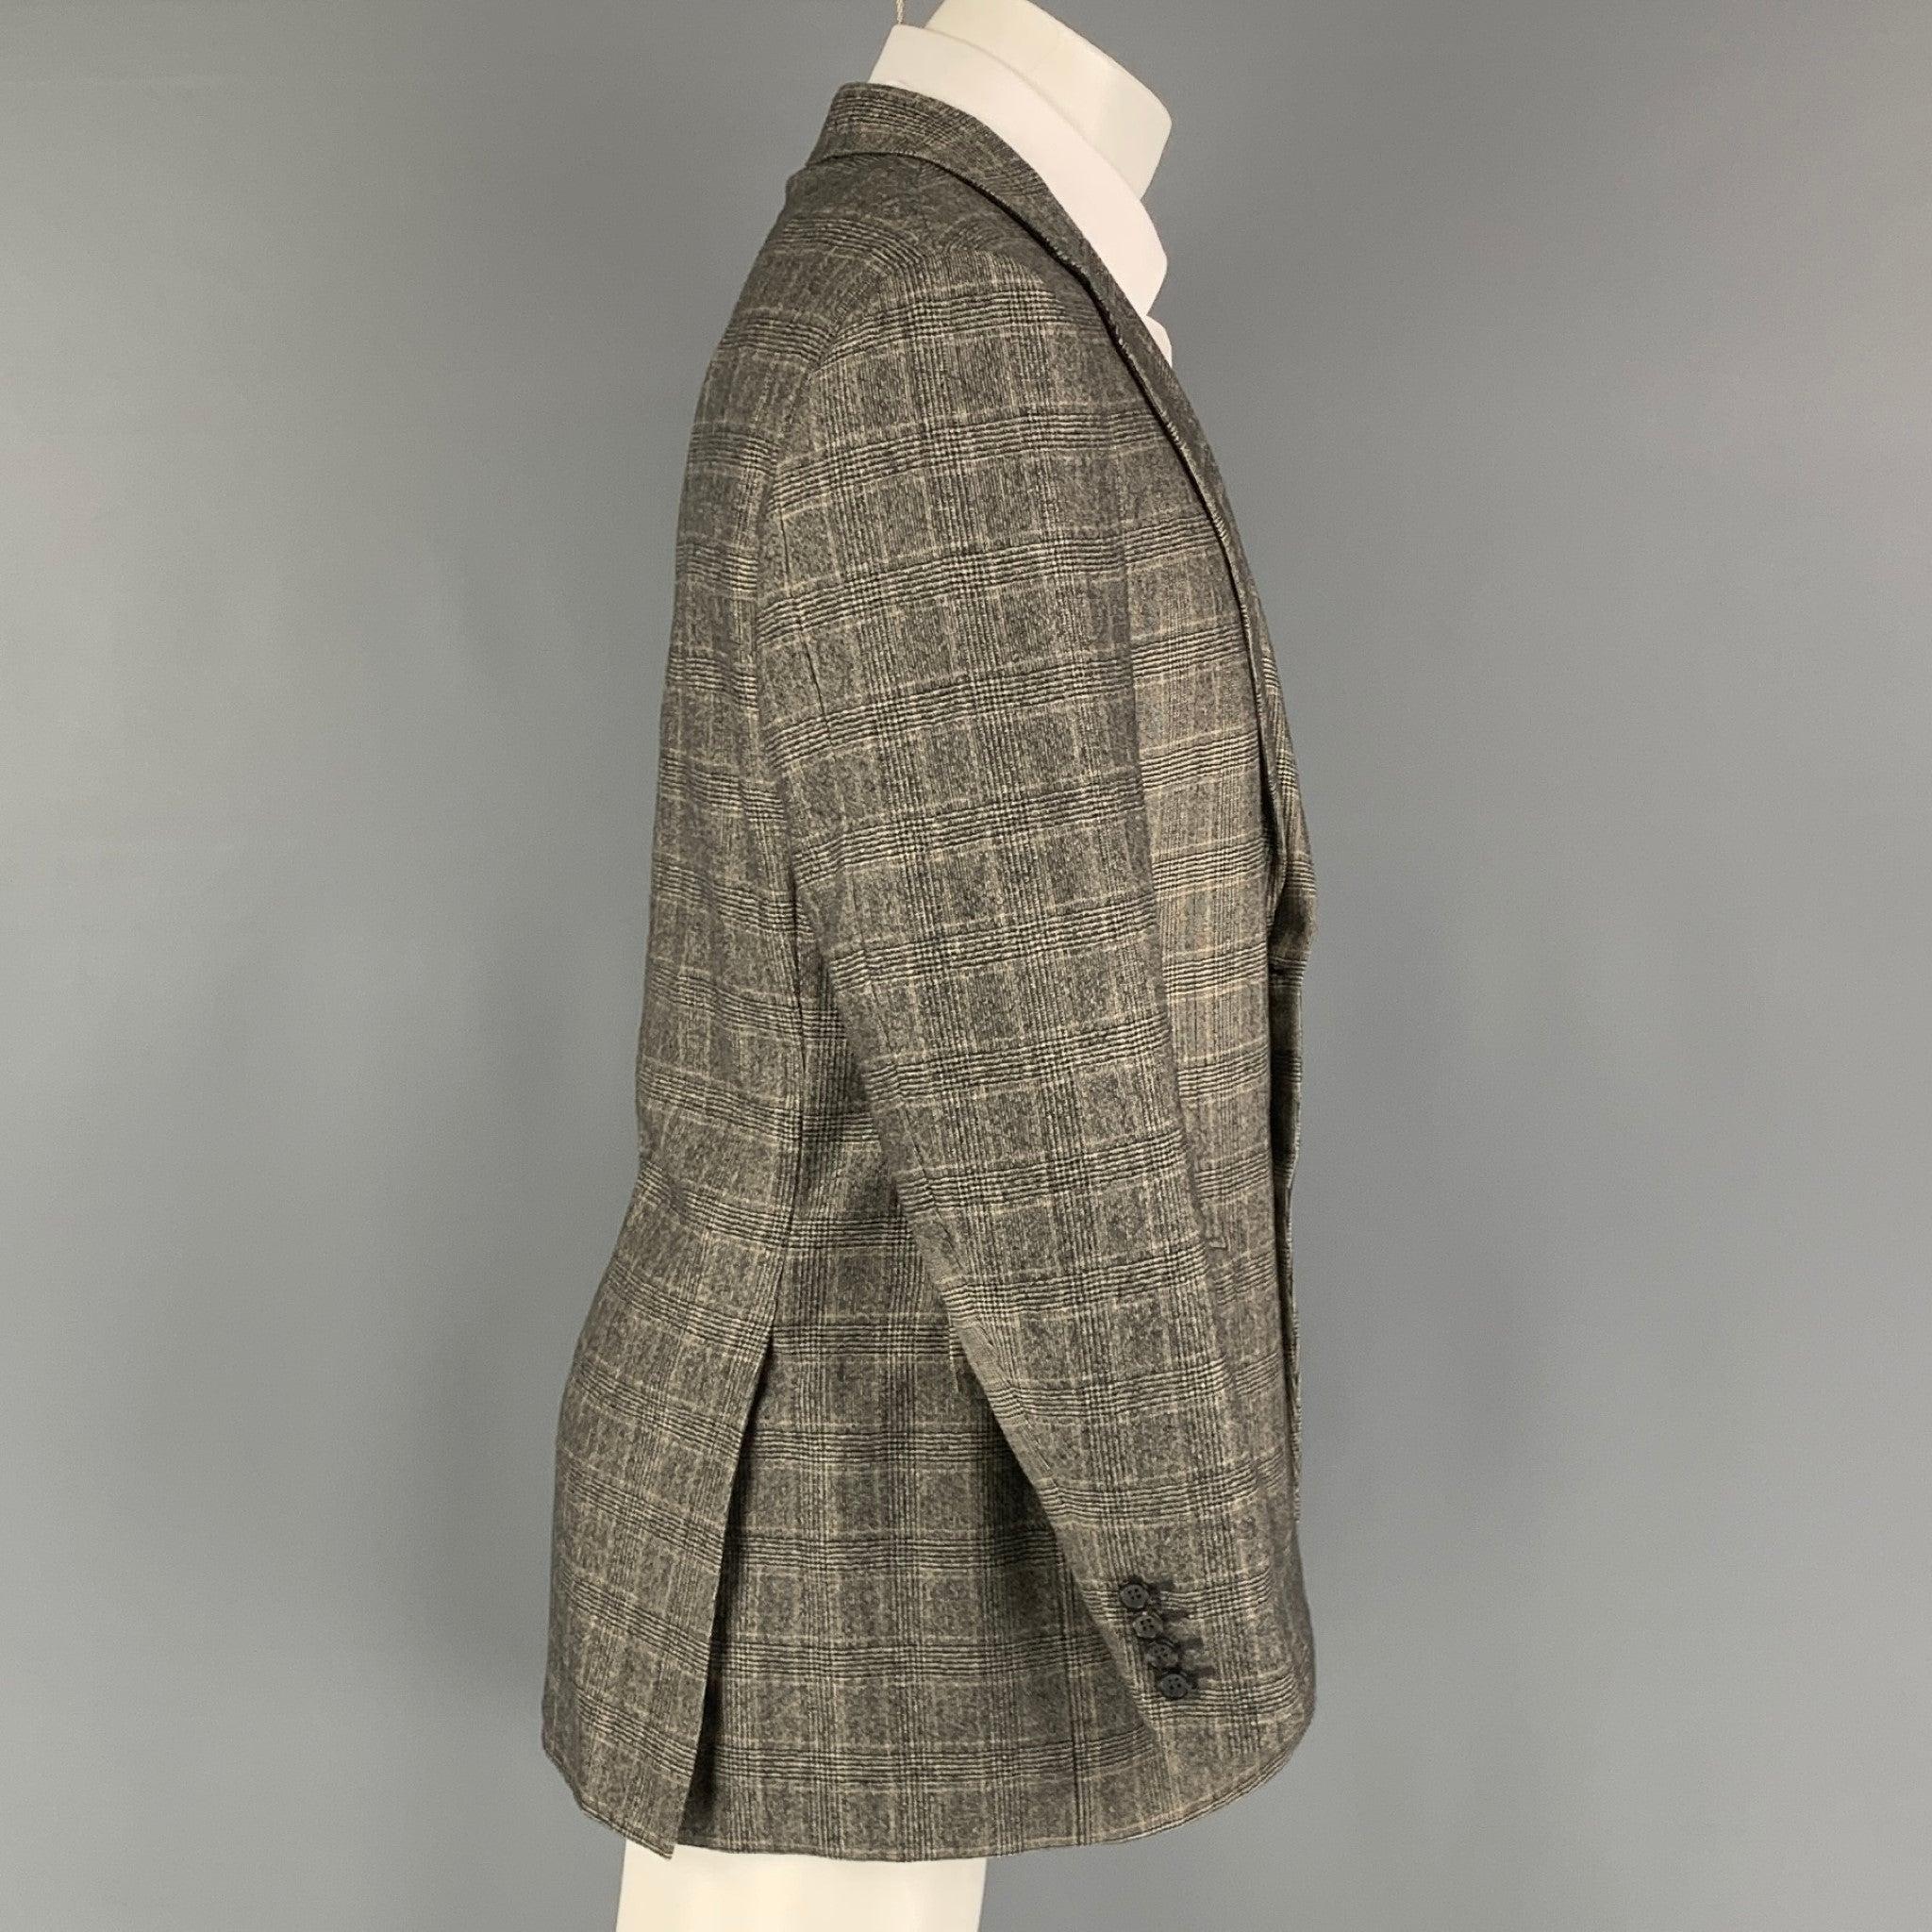 CANALI blazer comes in black and beige glenplaid cashmere material, featuring a notch lapel, flap pockets, 2 buttons closure, single breasted. Made in Italy. Excellent Pre-Owned Condition. 

Marked:   50R IT  

Measurements: 
  
Shoulder: 19 inches